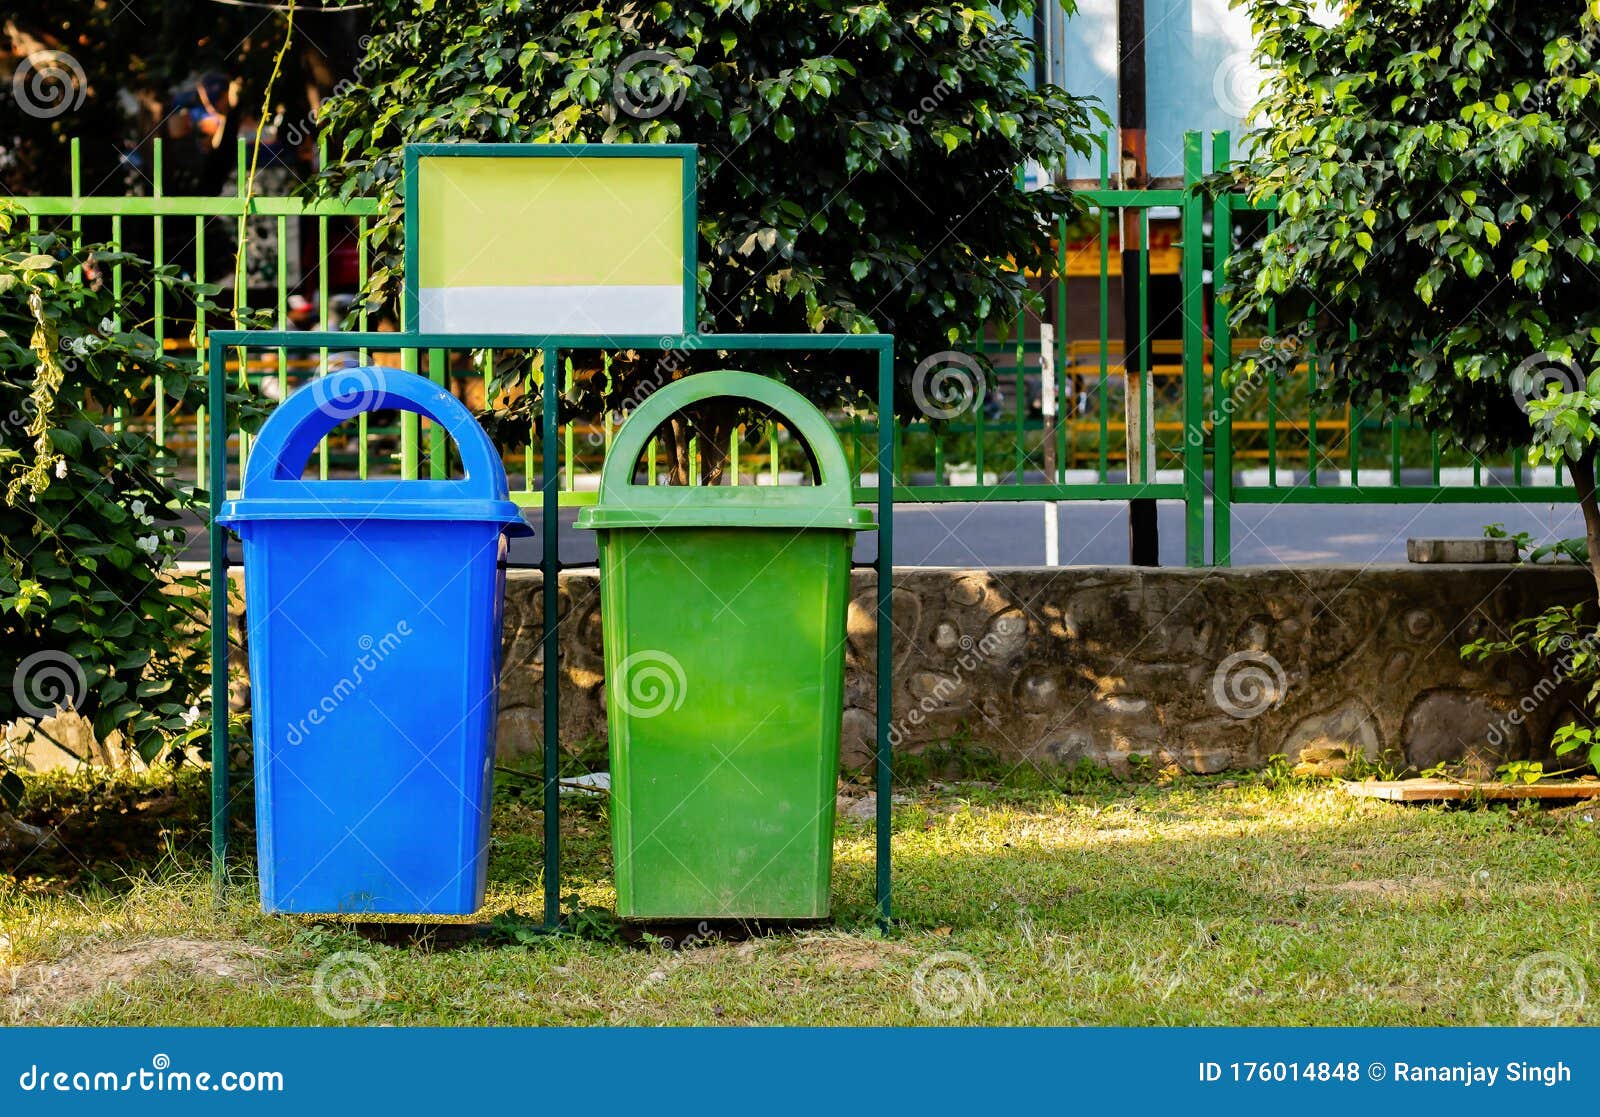 paper and plastic recycle bin placed in the garden for cleanness. cleanness concept